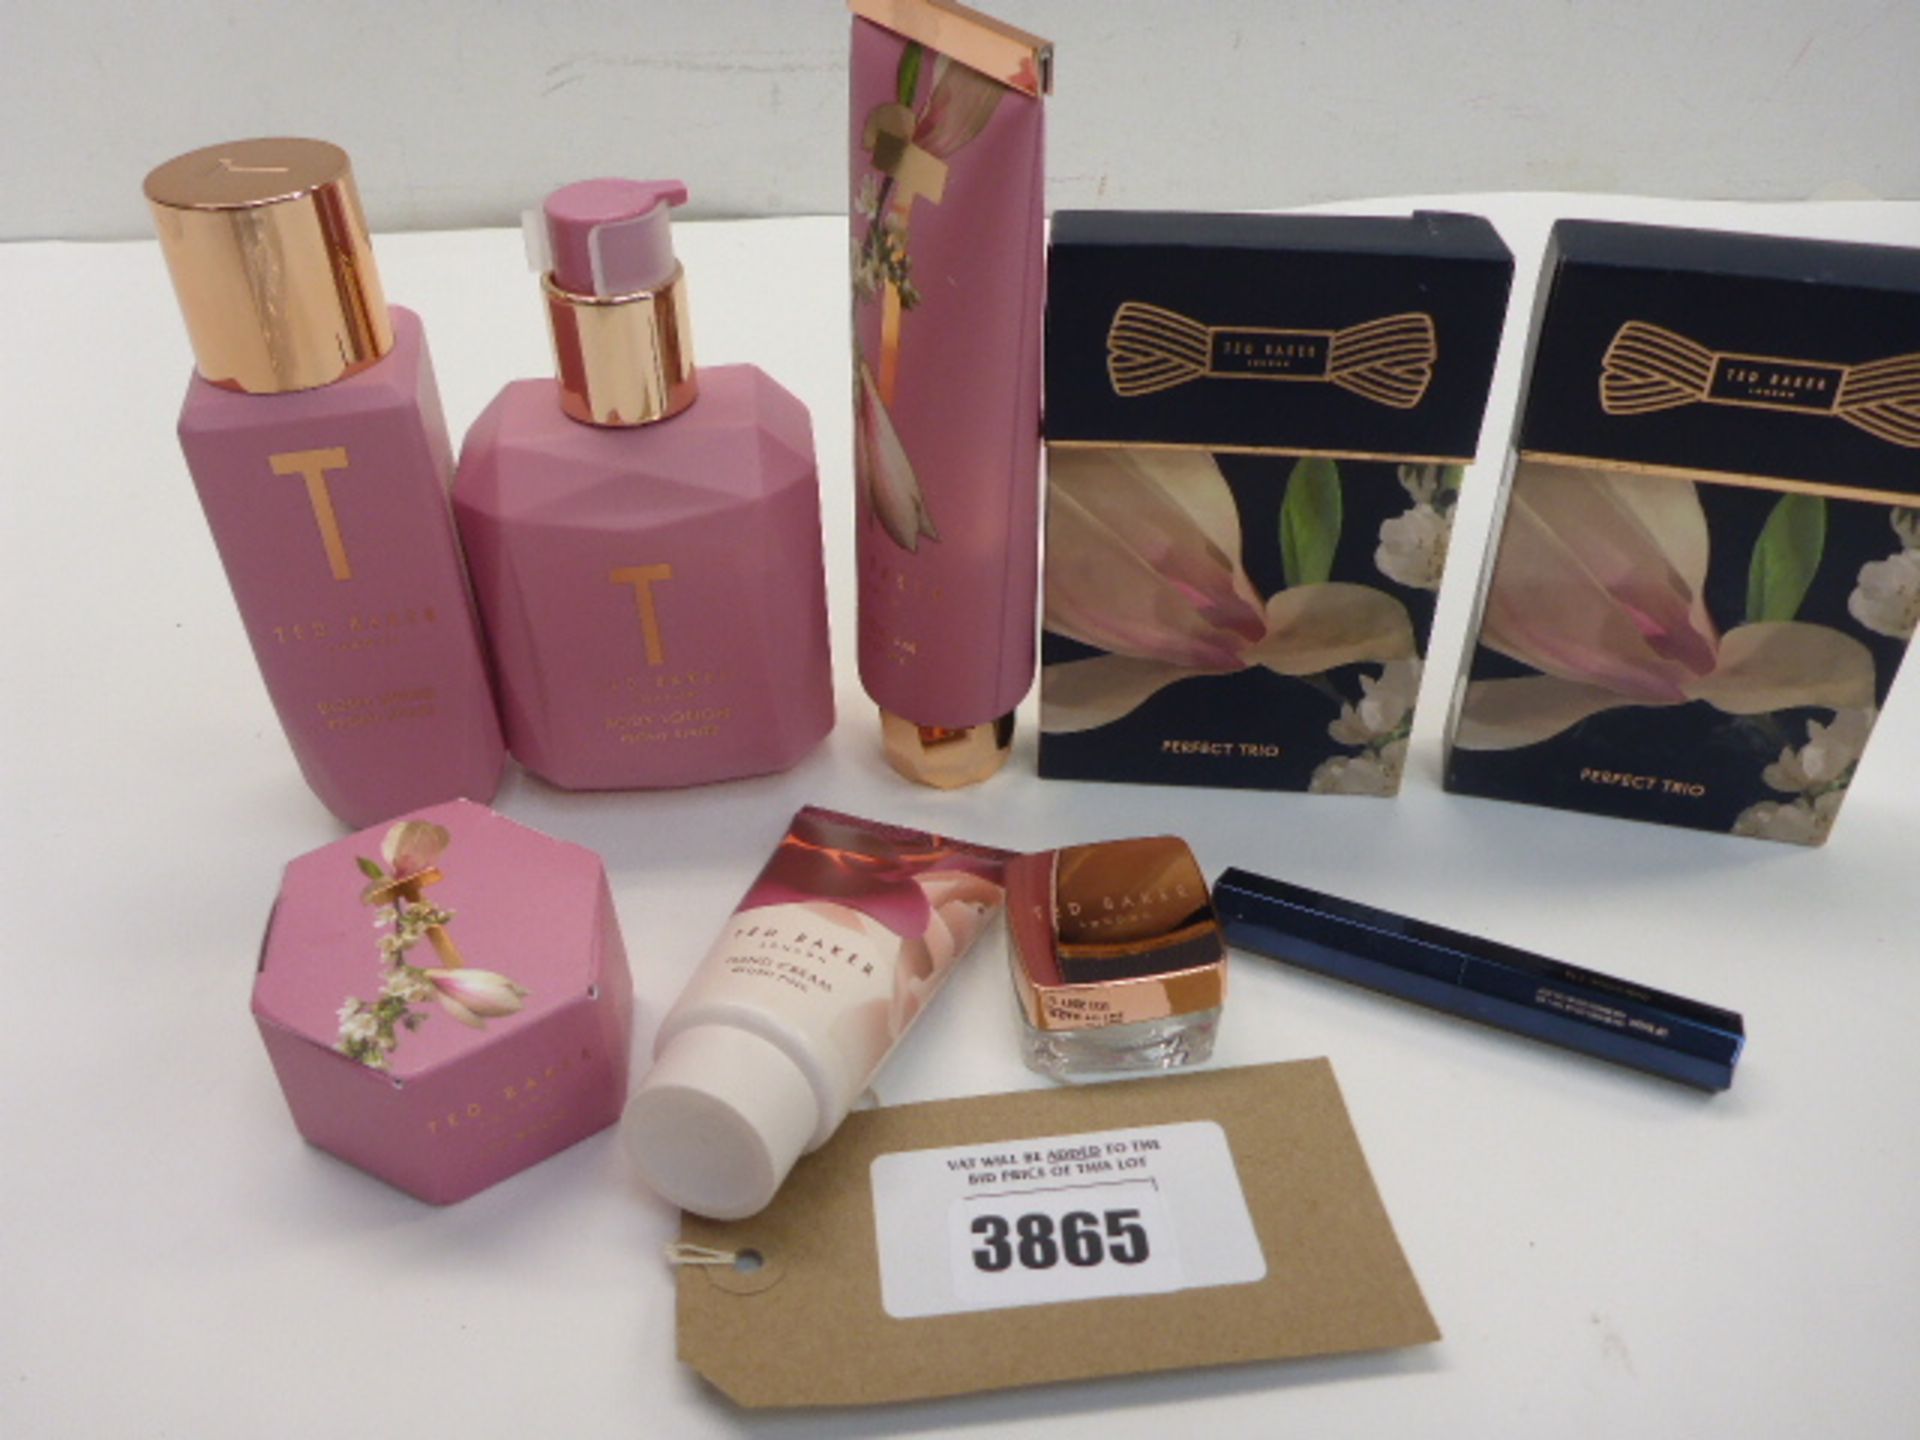 Selection of Ted Baker beauty products including body lotion, body spray, lip balm, hand cream etc